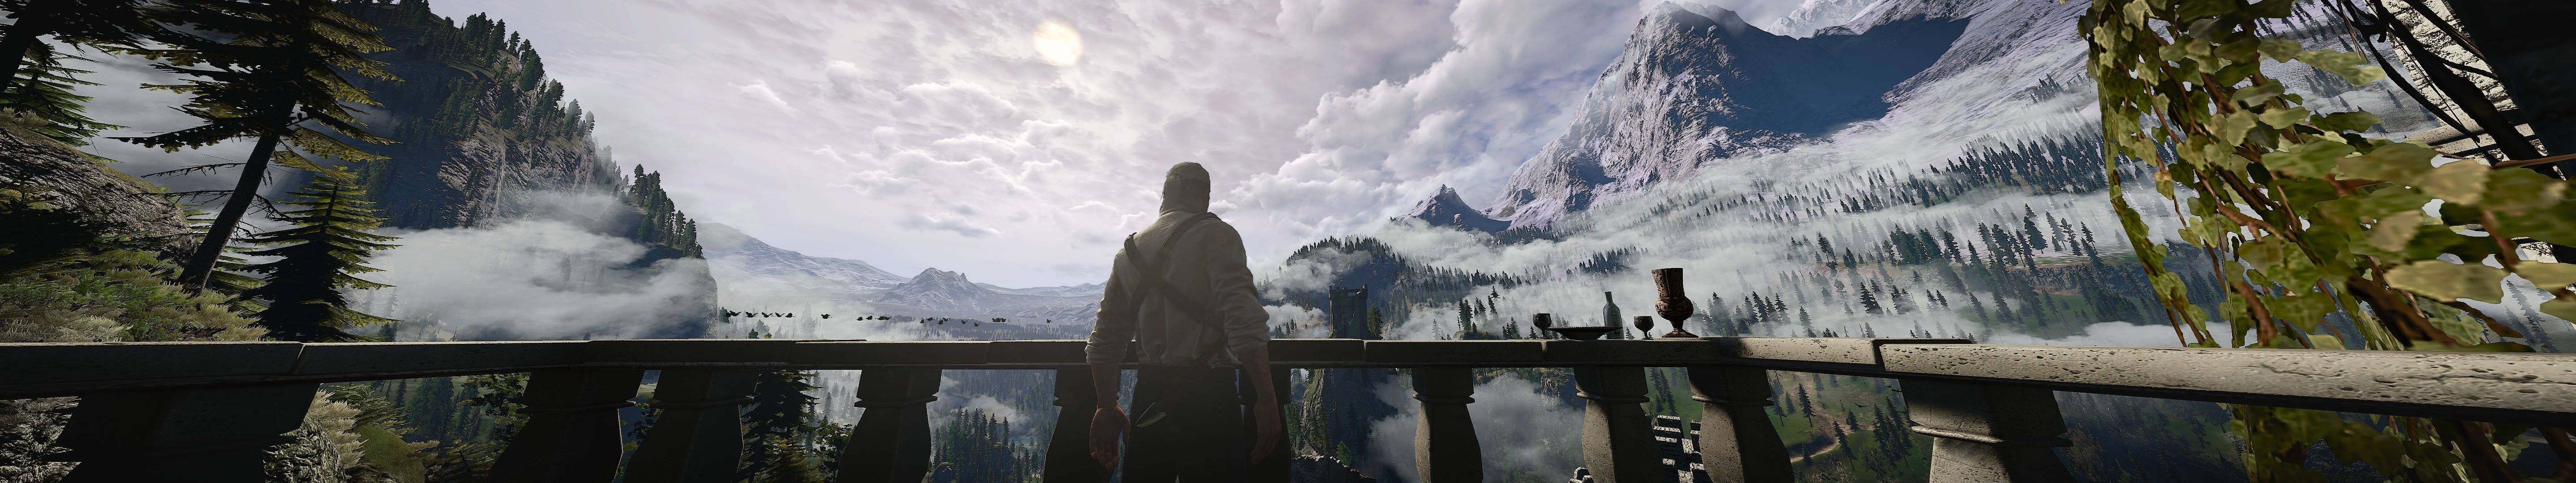 Enjoy the breathtaking view of the Northern Kingdoms from Gwent in The Witcher 3 game Wallpaper